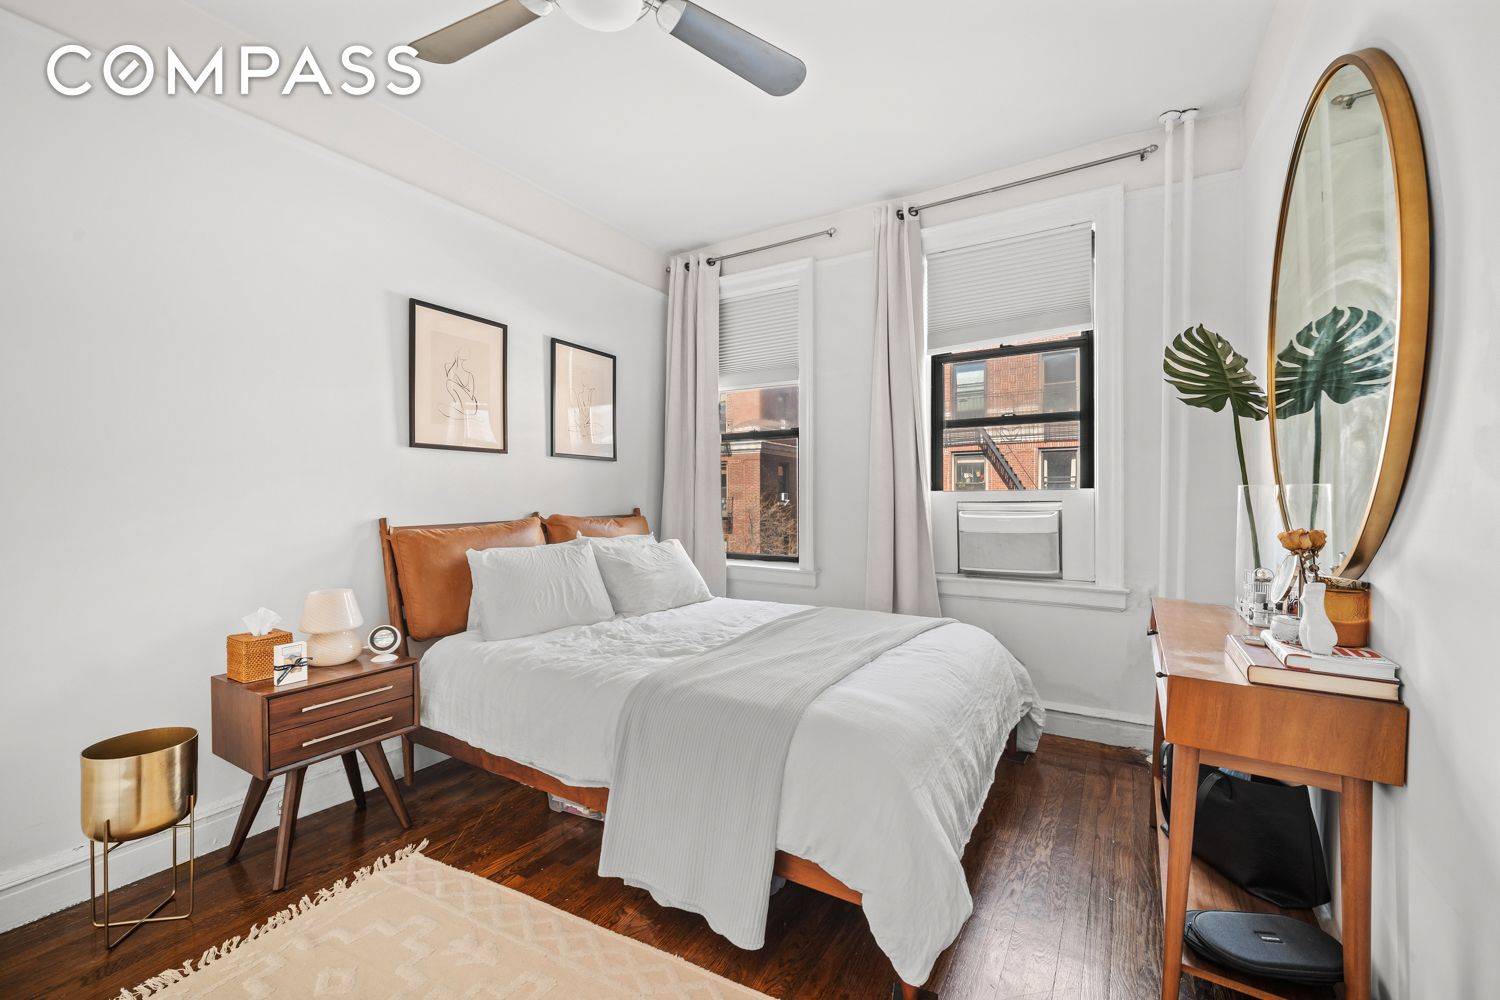 Rarely available one bedroom apartment for sale at 130 West 16th Street, a lovely pre war building on a beautiful tree lined street in Chelsea.